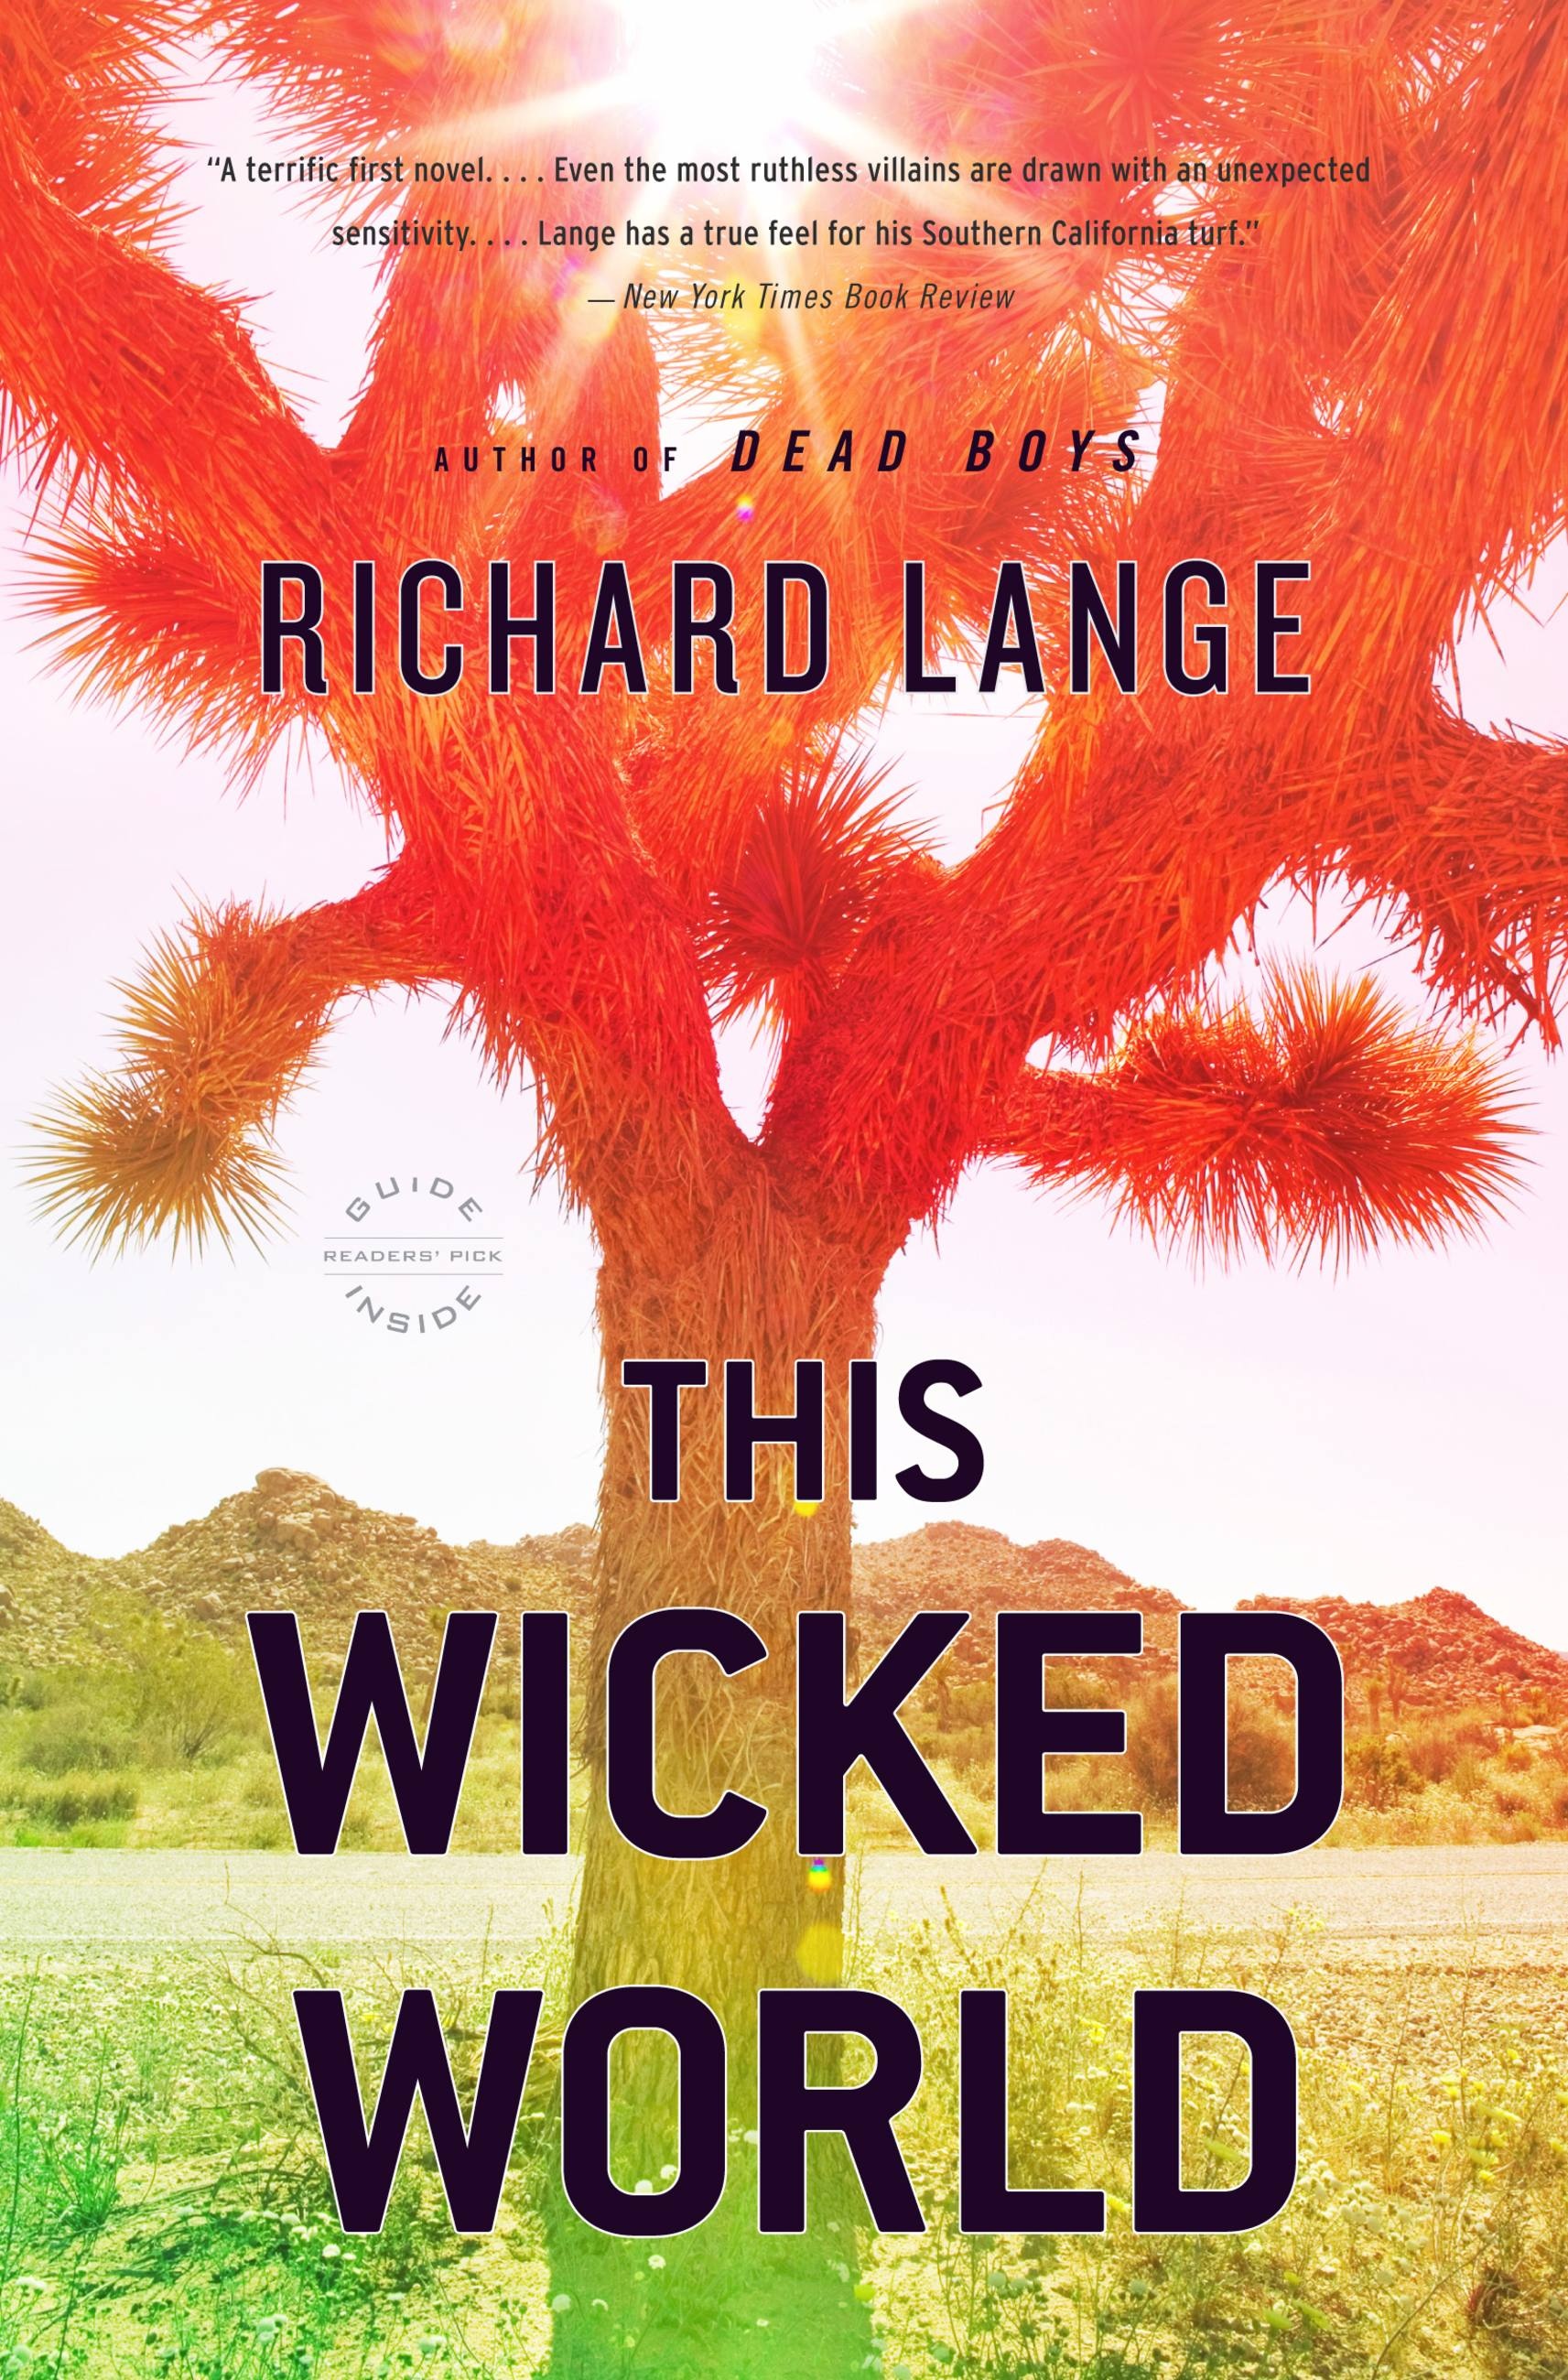 Teen Gets Pounded - This Wicked World by Richard Lange | Hachette Book Group